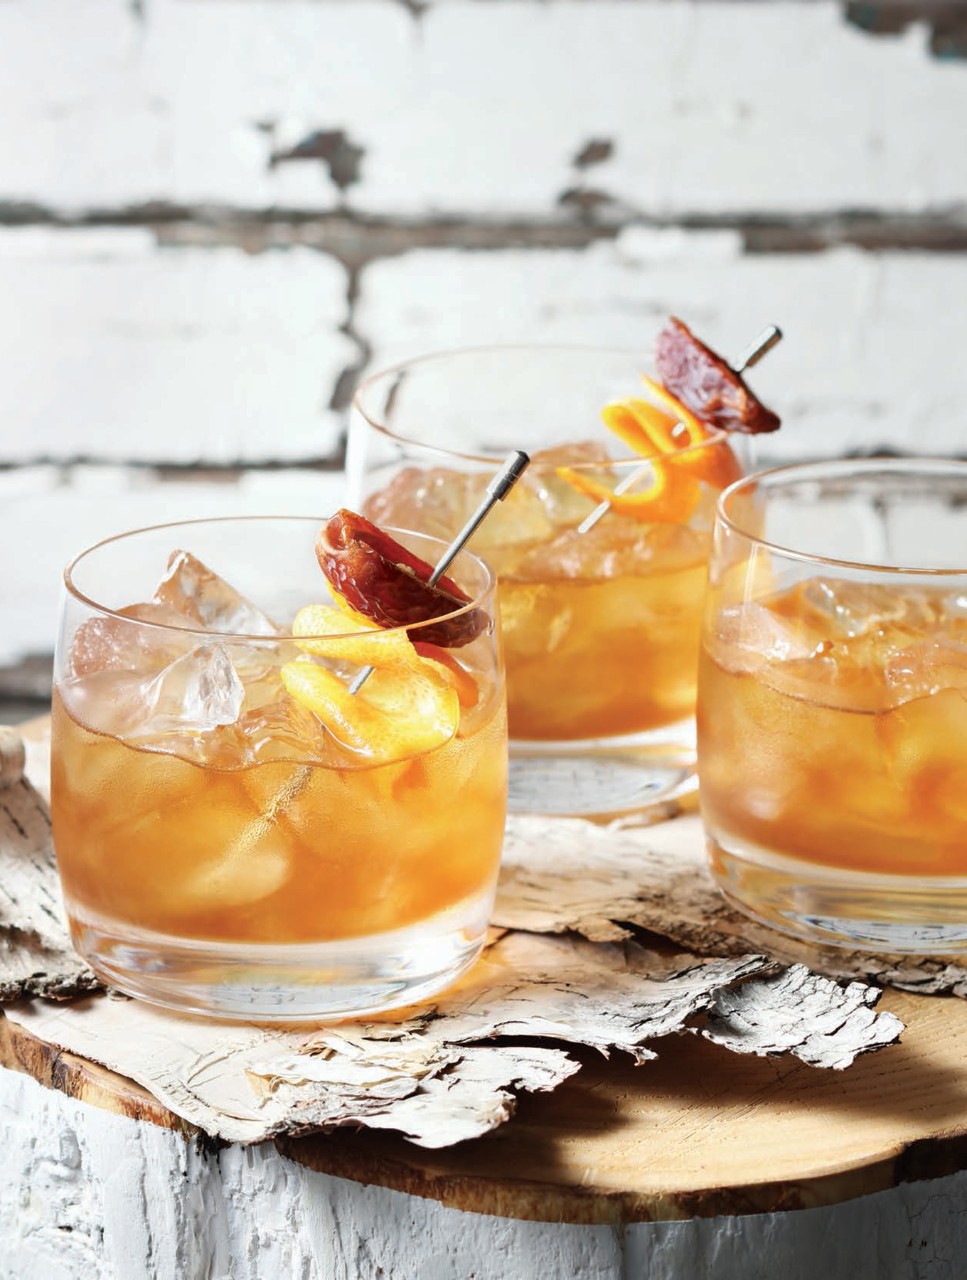 Smoked Ice Old Fashioned